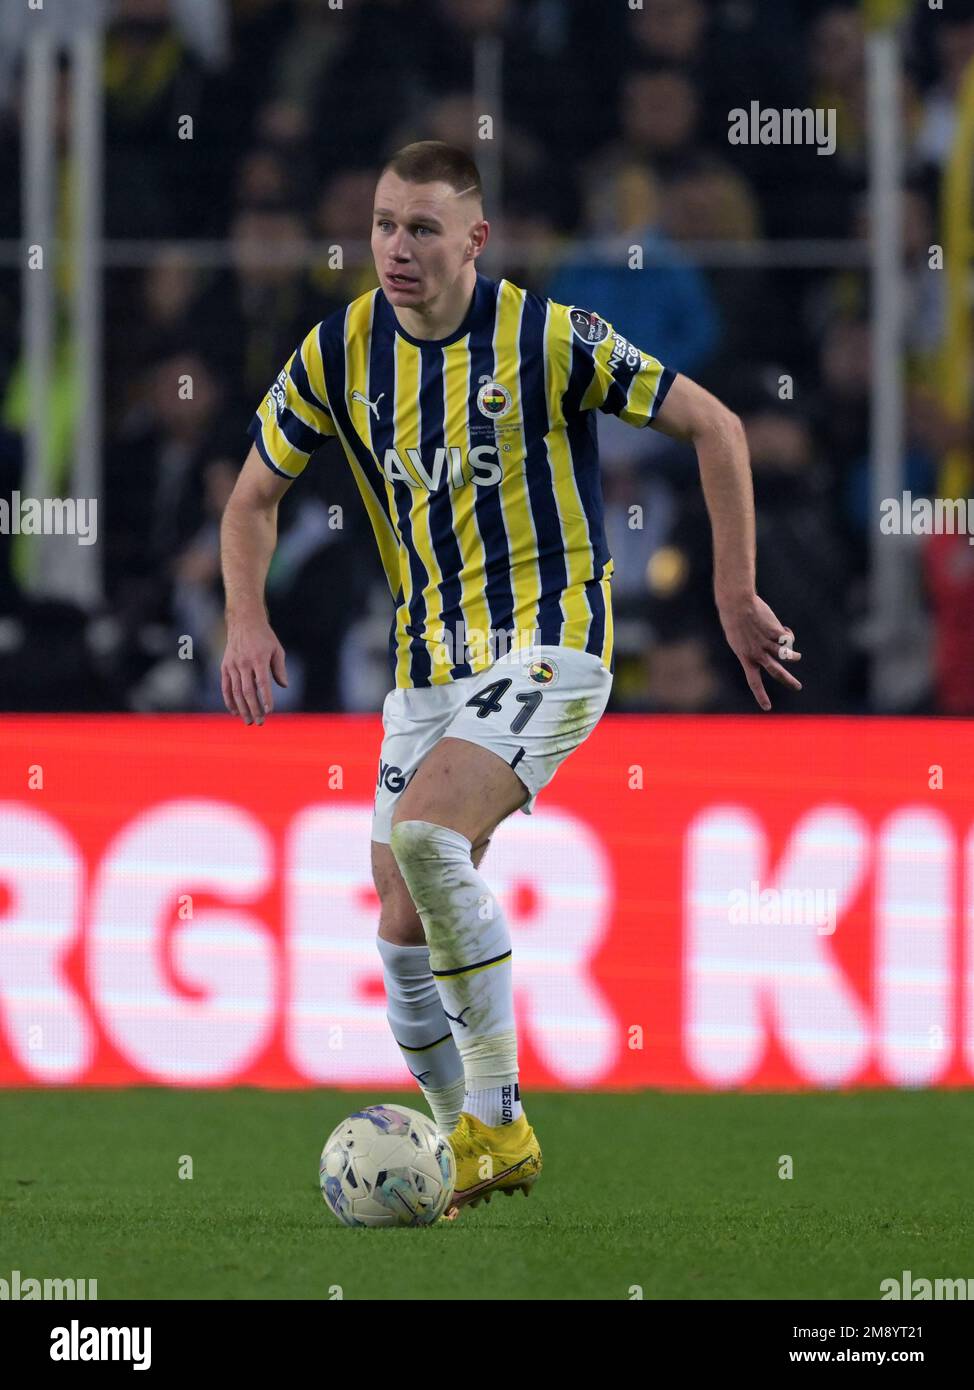 ISTANBUL - Attila Szalai of Fenerbahce SK during the Turkish Super Lig  match between Fenerbahce AS and Galatasaray AS at Ulker stadium on January  8, 2023 in Istanbul, Turkey. AP | Dutch